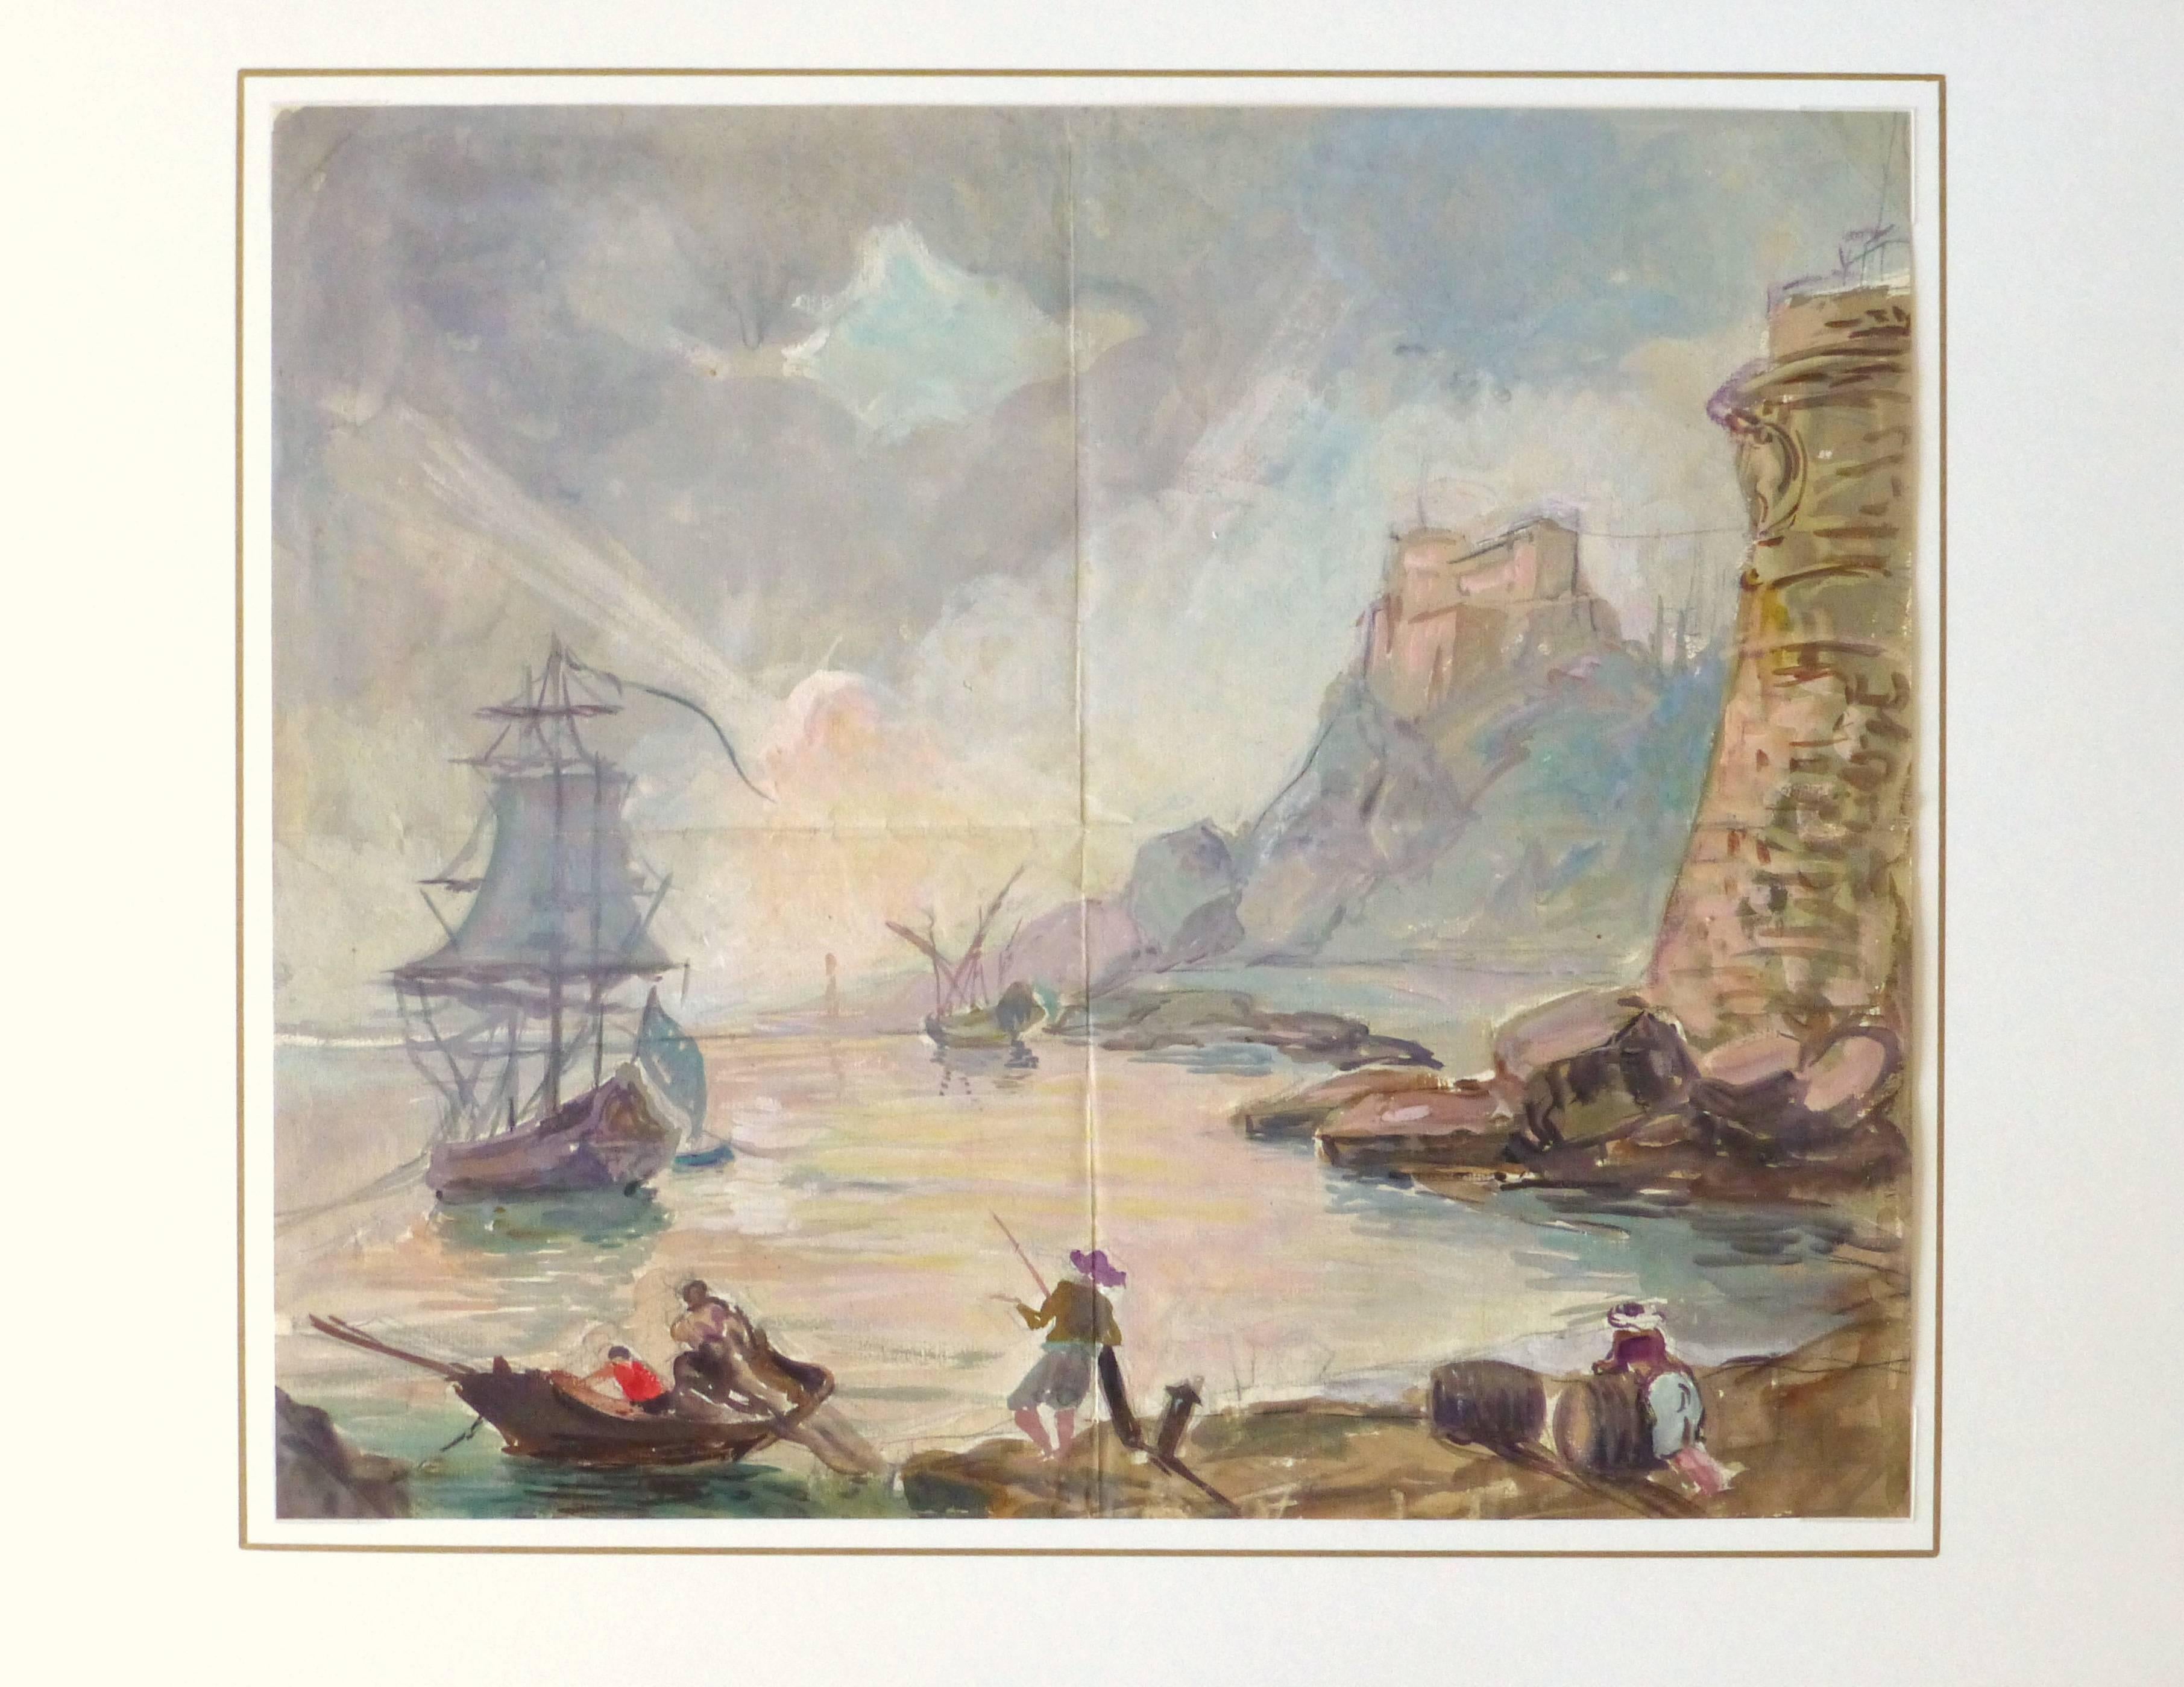 Spectacular watercolor seascape of boats in a old world harbor under a dusk colored sky, circa 1860.

Original artwork on paper displayed on a white mat with a gold border. Archival plastic sleeve and Certificate of Authenticity included. Artwork,